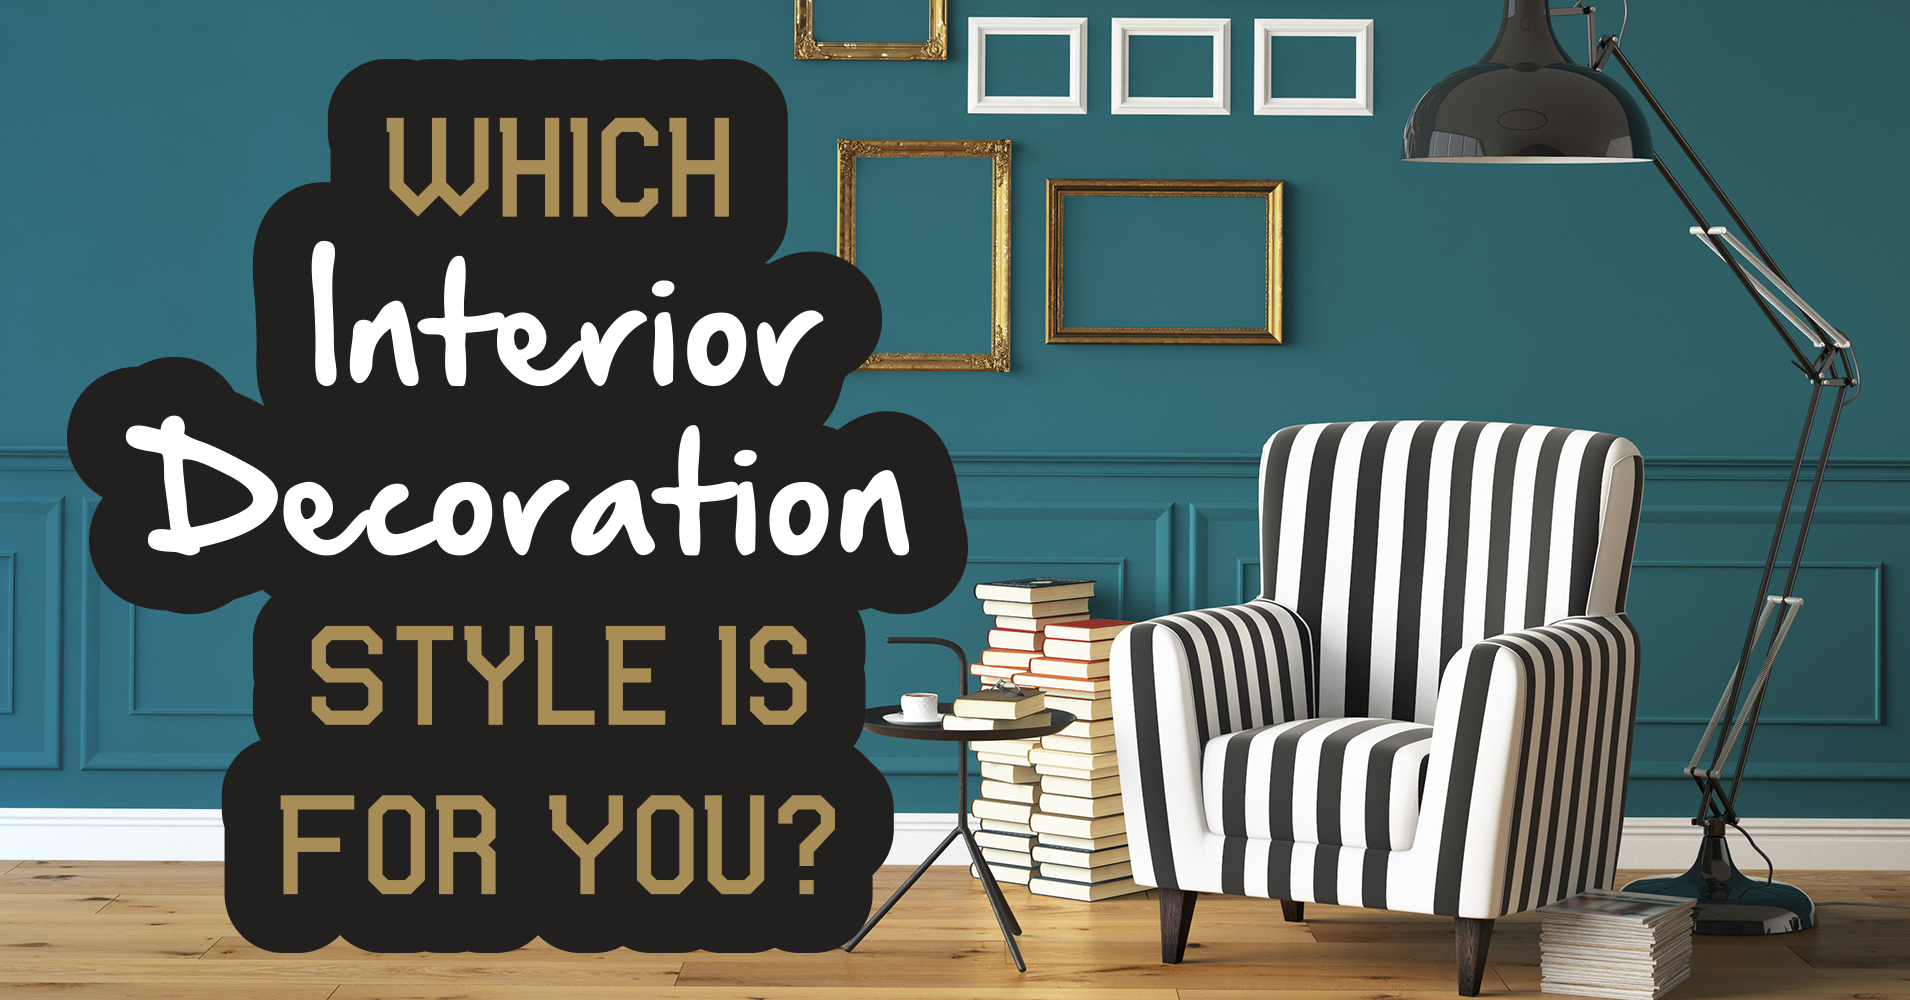 Which Interior Decoration Style is For You? Quiz